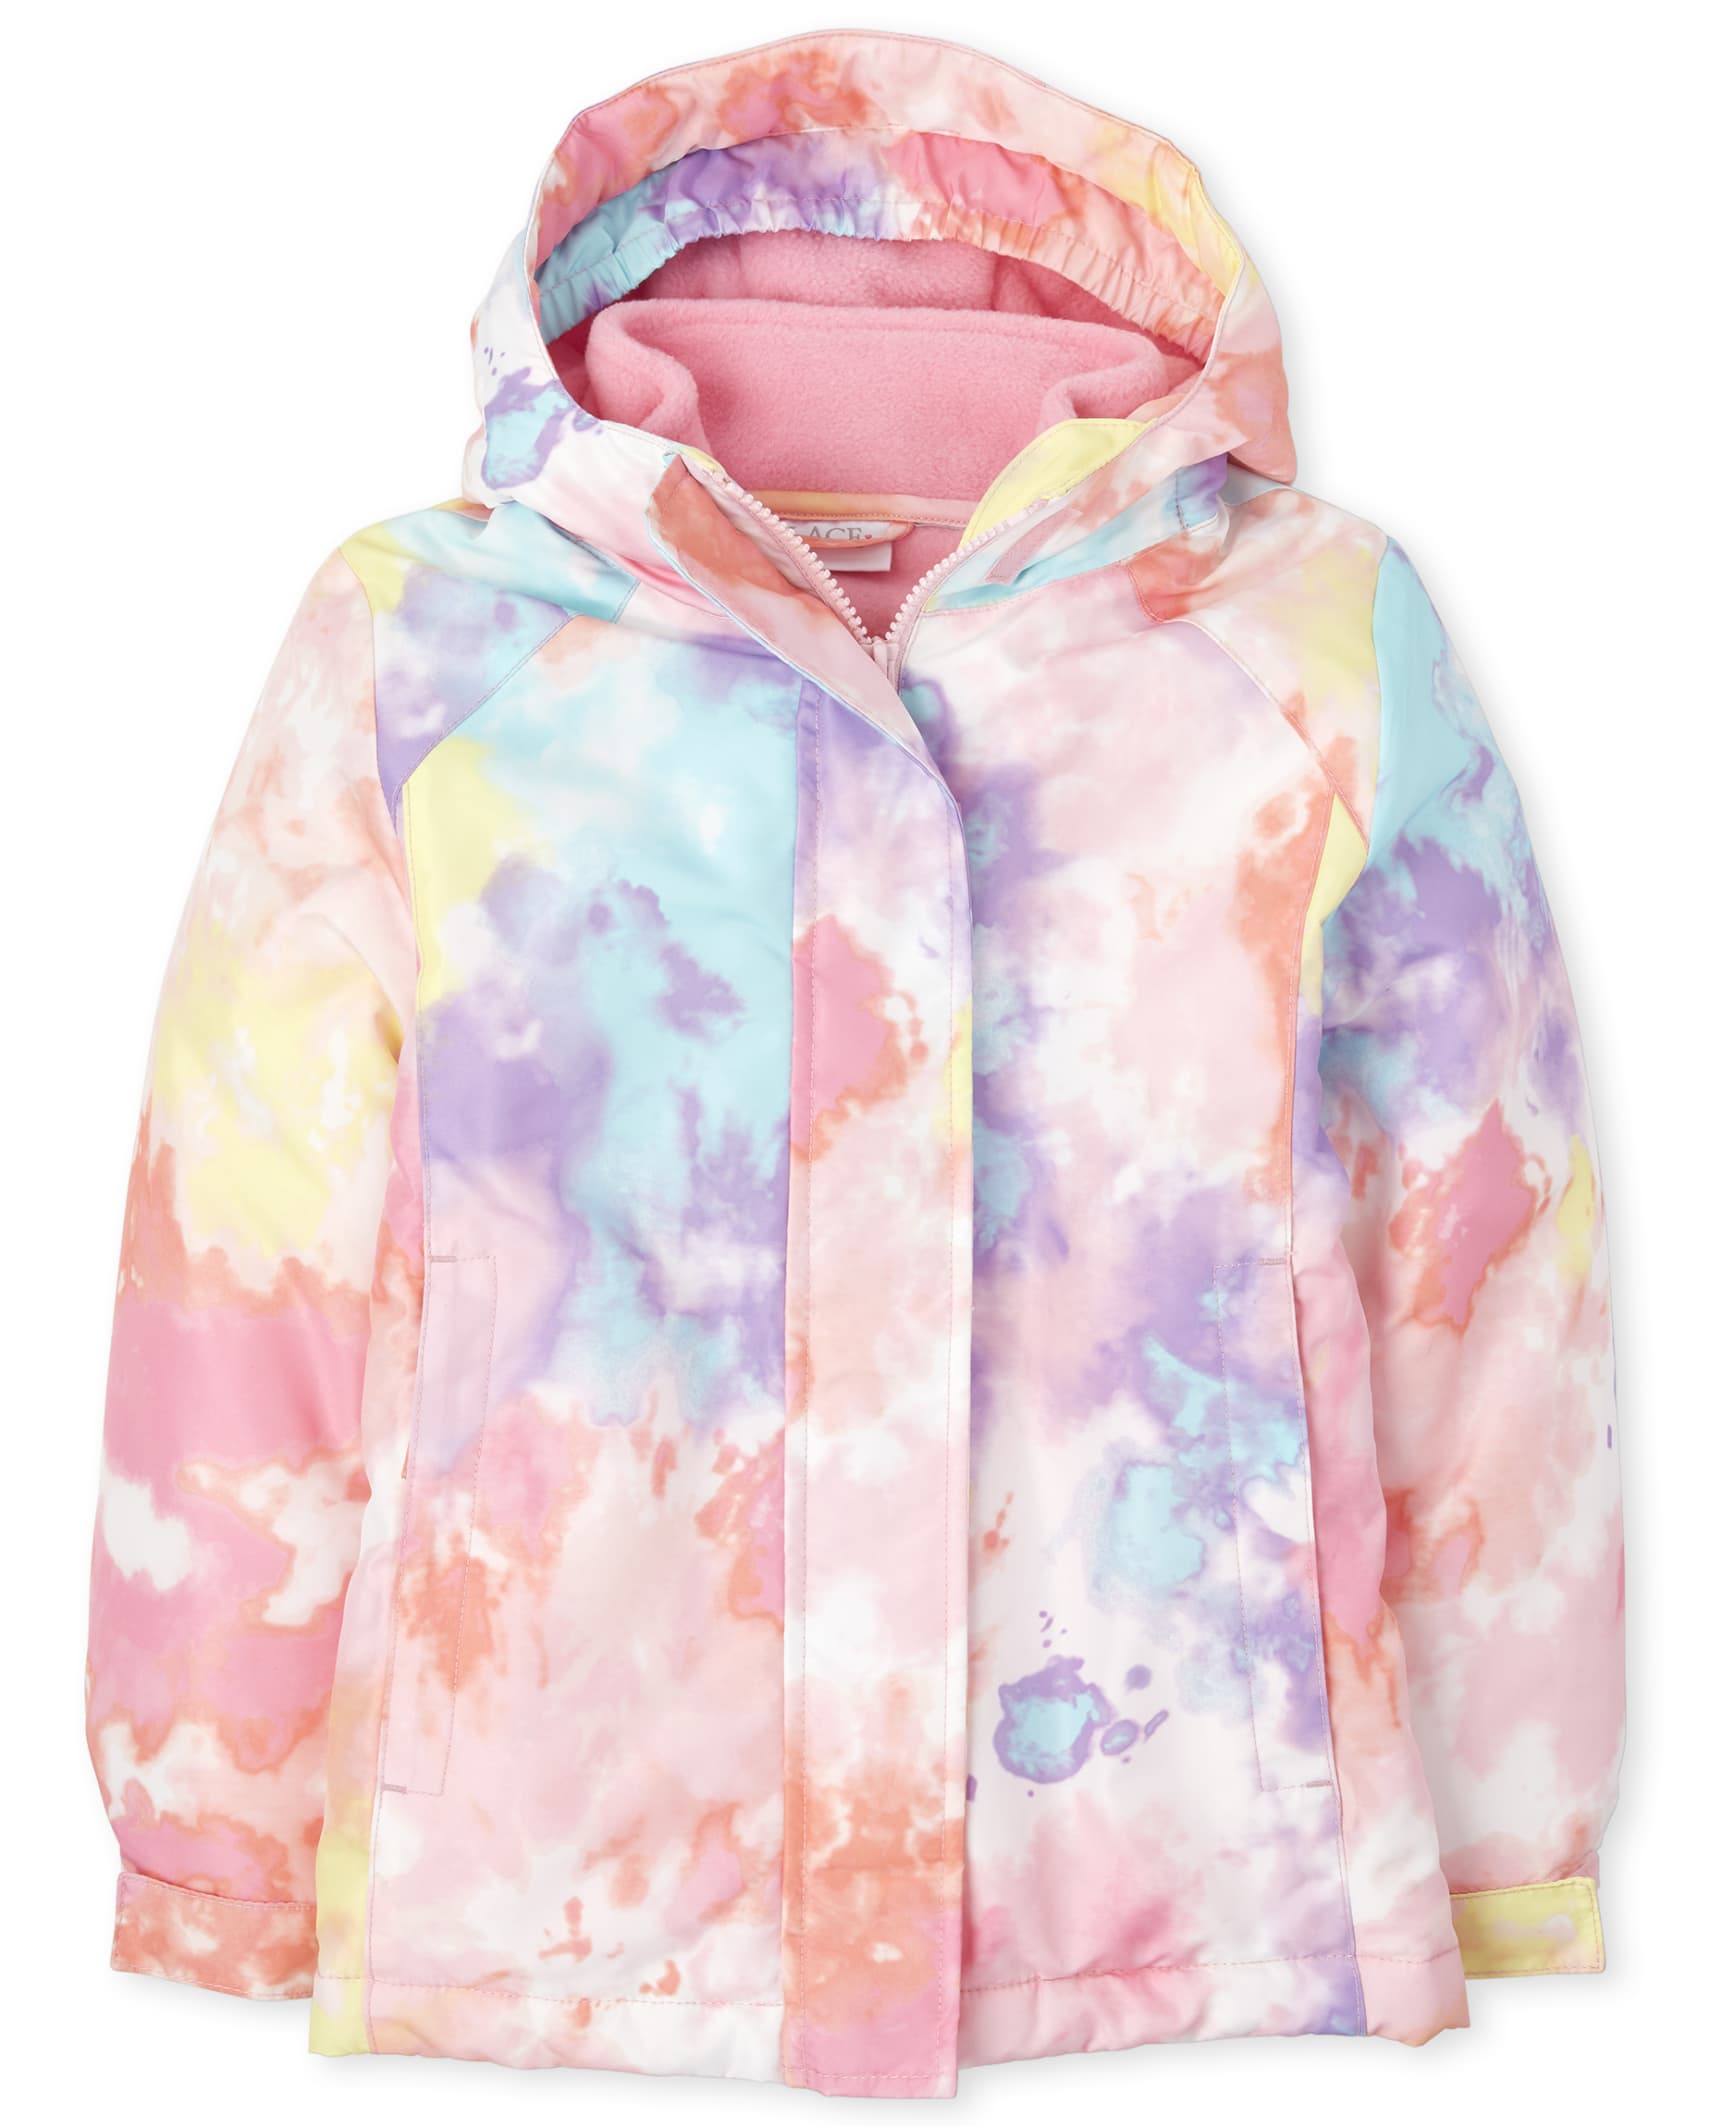 Girls Long Sleeve Print 3 In 1 Jacket | The Children's Place